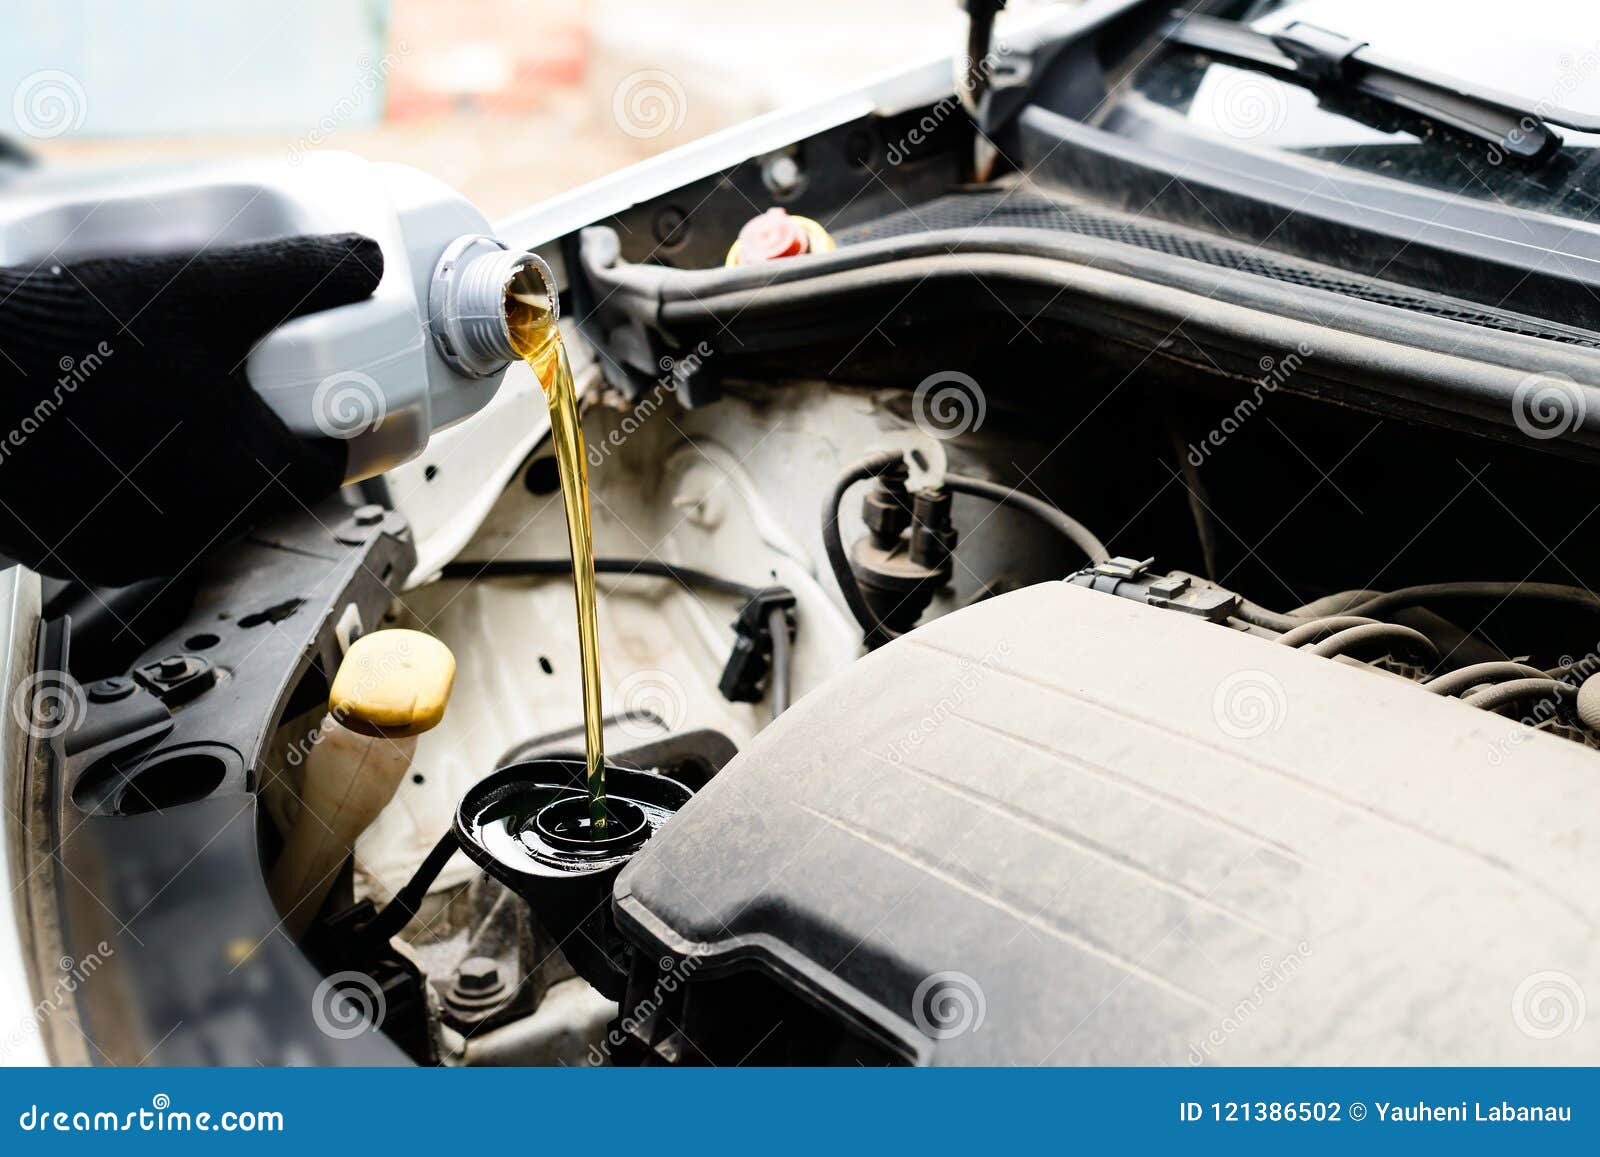 fresh oil being poured during an oil change to car engine, close